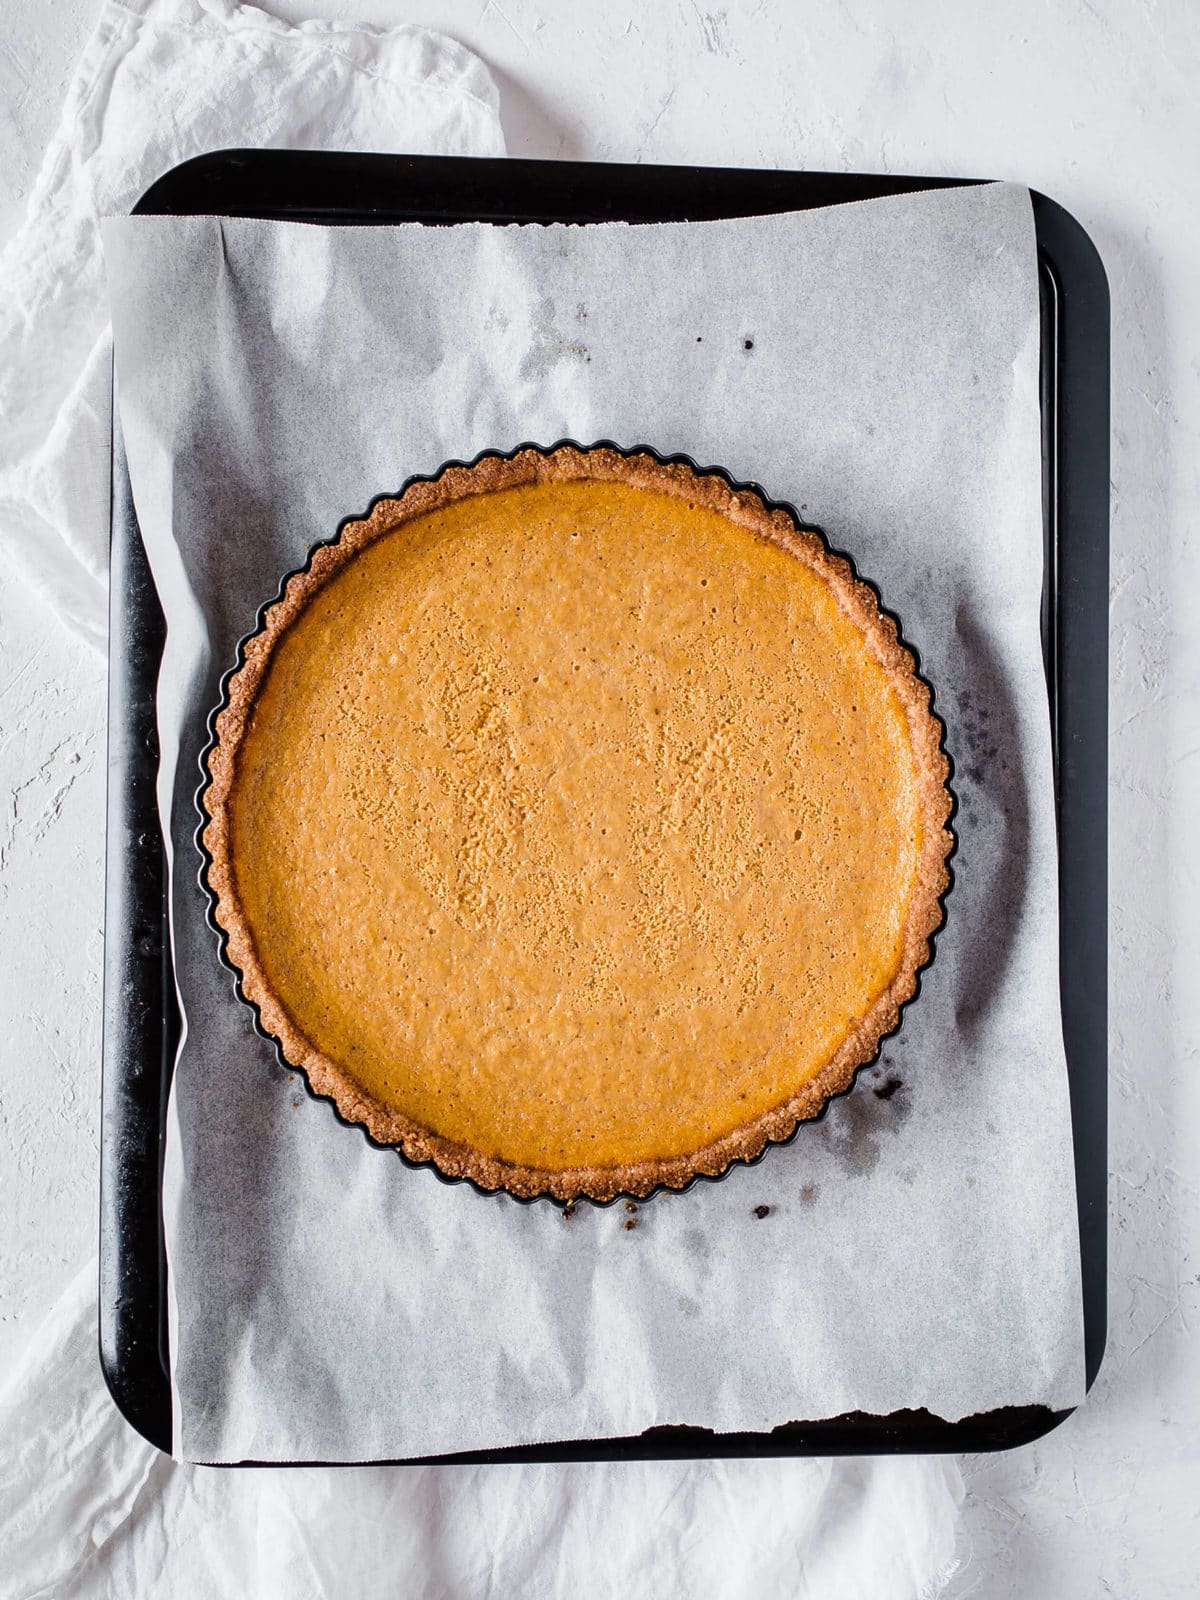 a fresh baked pumpkin pie, right out of the oven, on a parchment lined baking sheet.